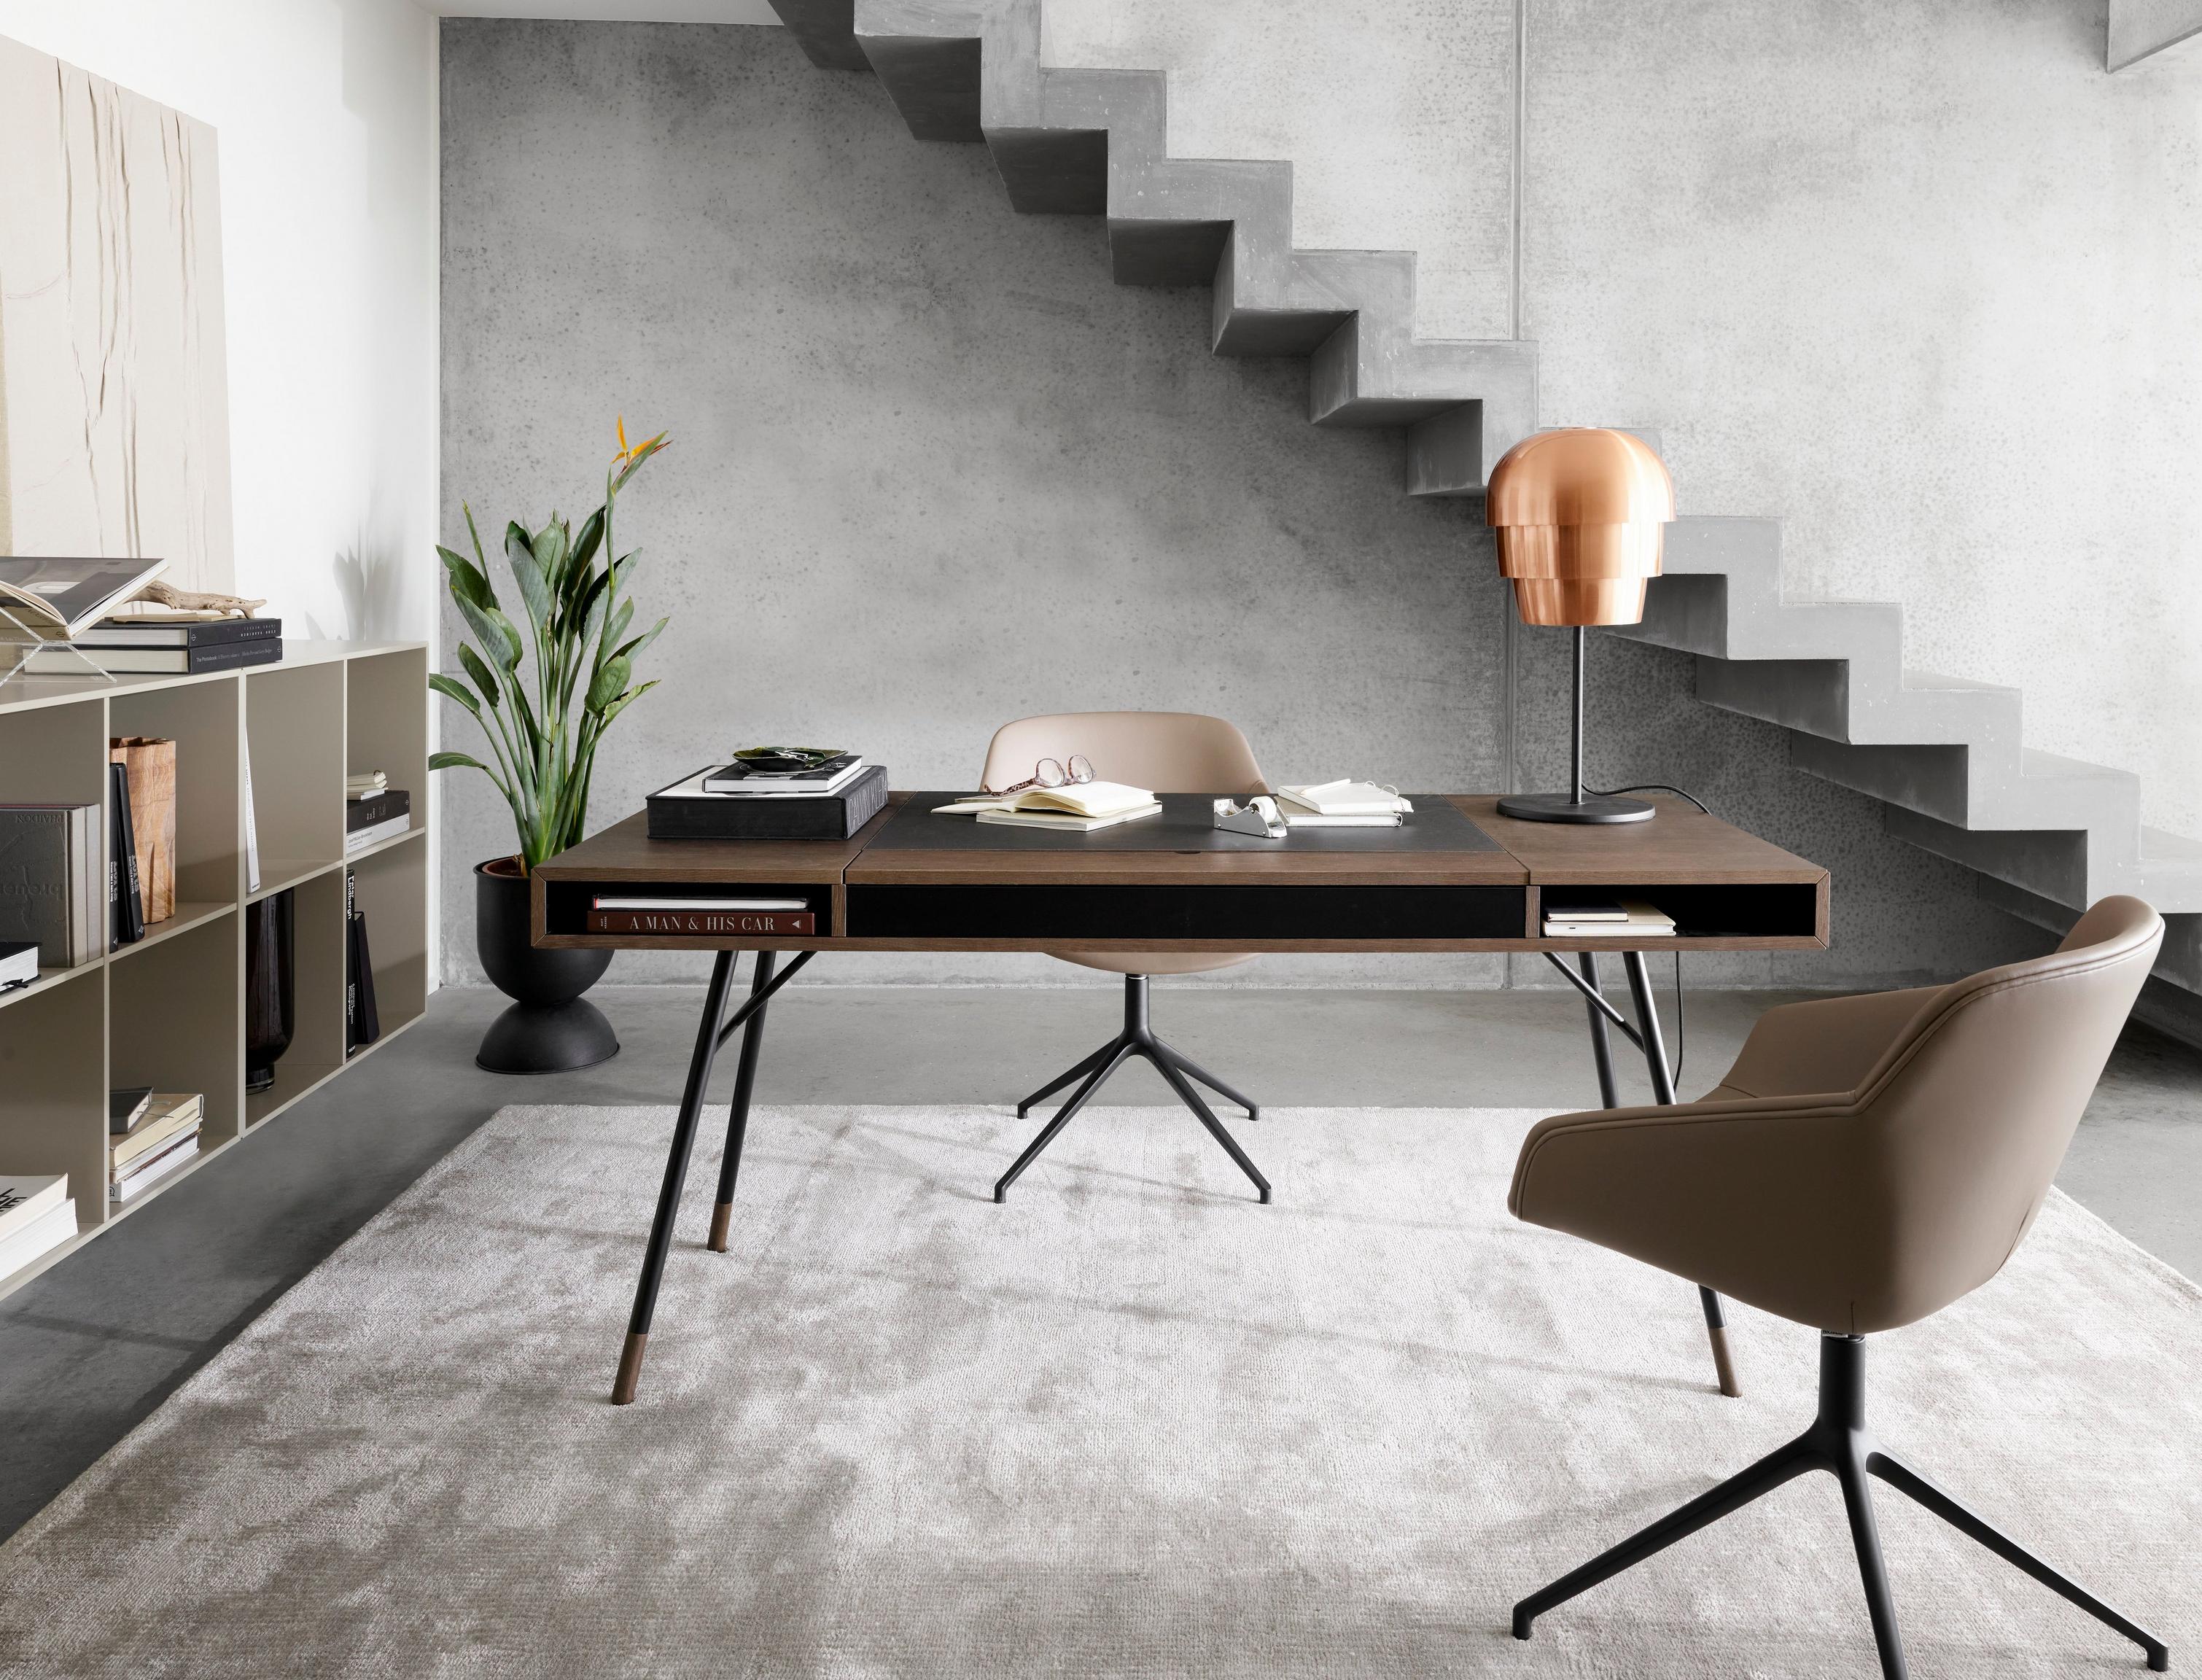 Stylish home office with a dark wood desk, tan chair, and copper lamp near concrete stairs.